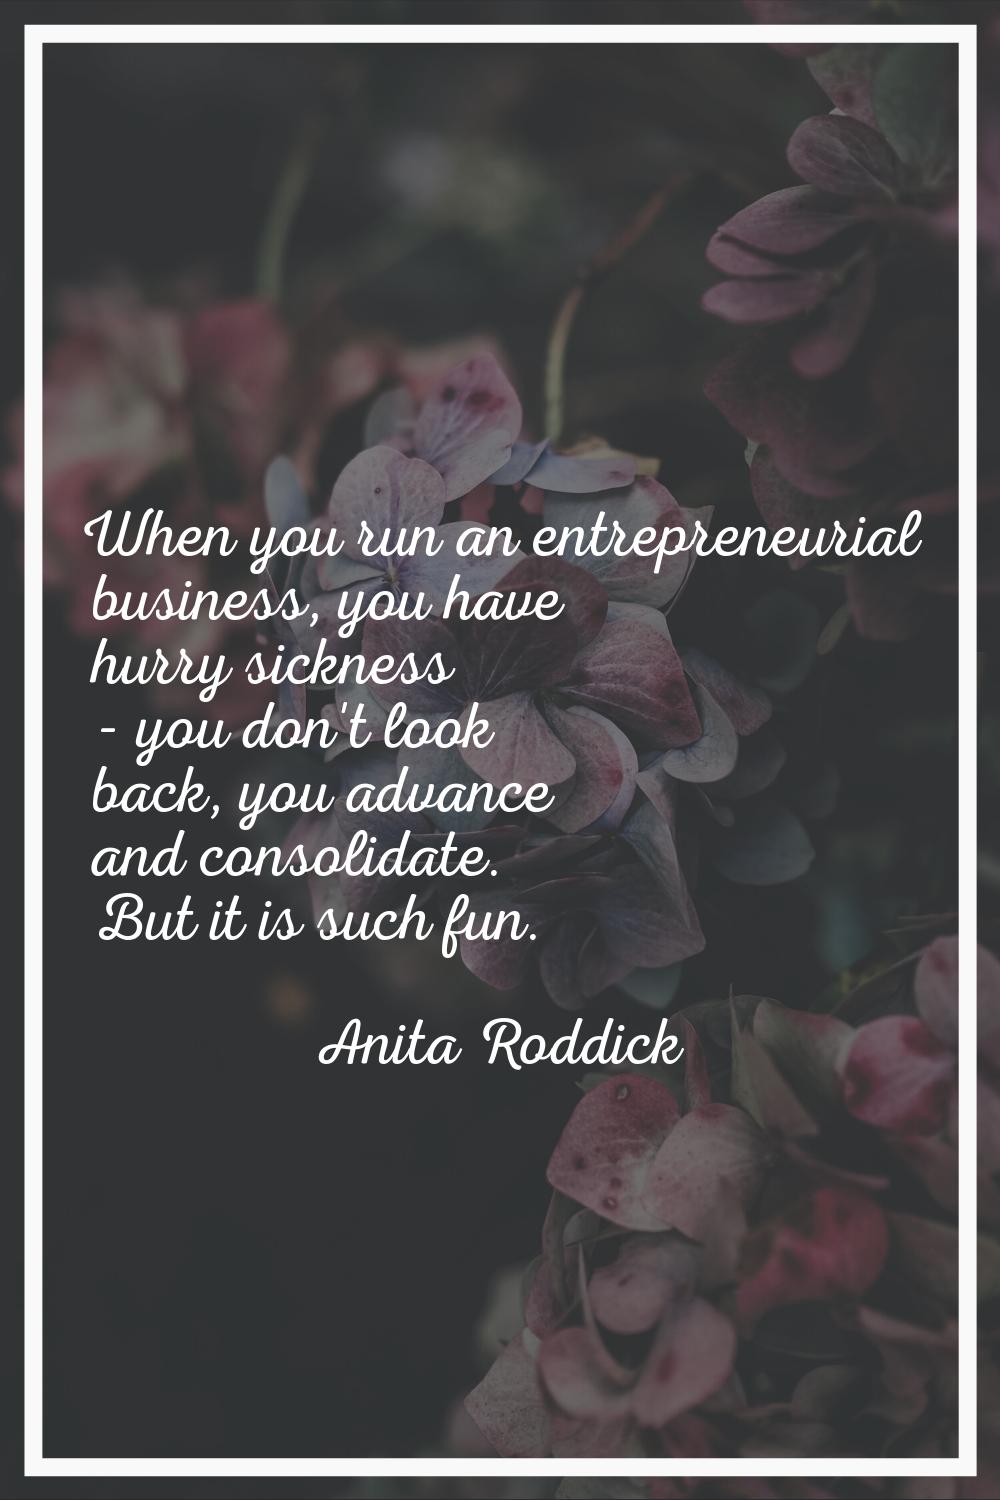 When you run an entrepreneurial business, you have hurry sickness - you don't look back, you advanc